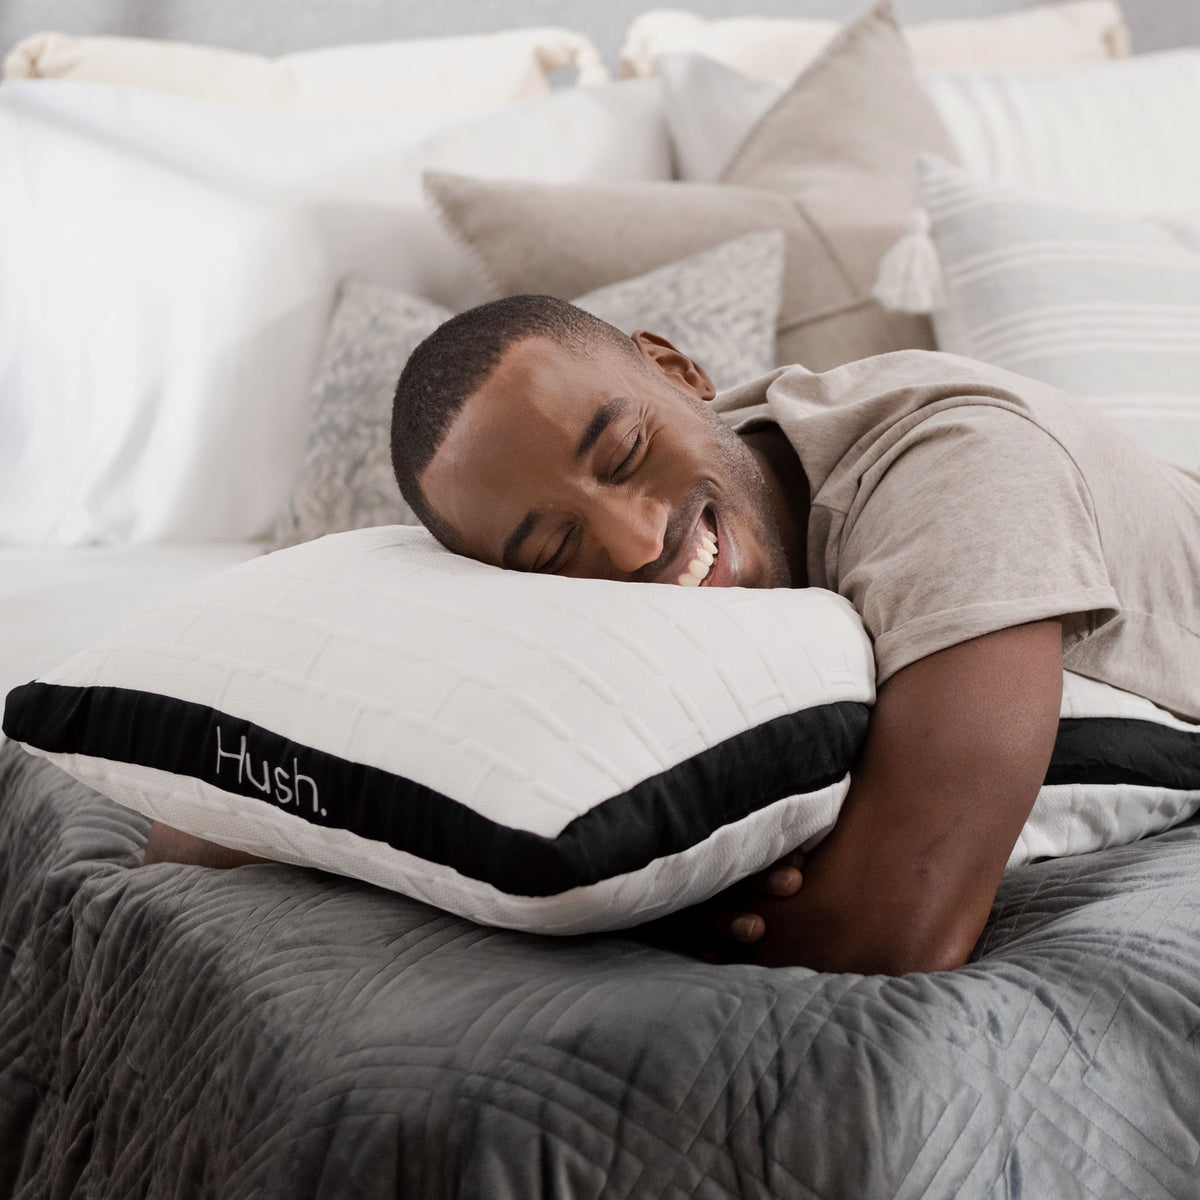 Pillow　Alternative　Foam　Adjustable　Down　Memory　and　The　Hush